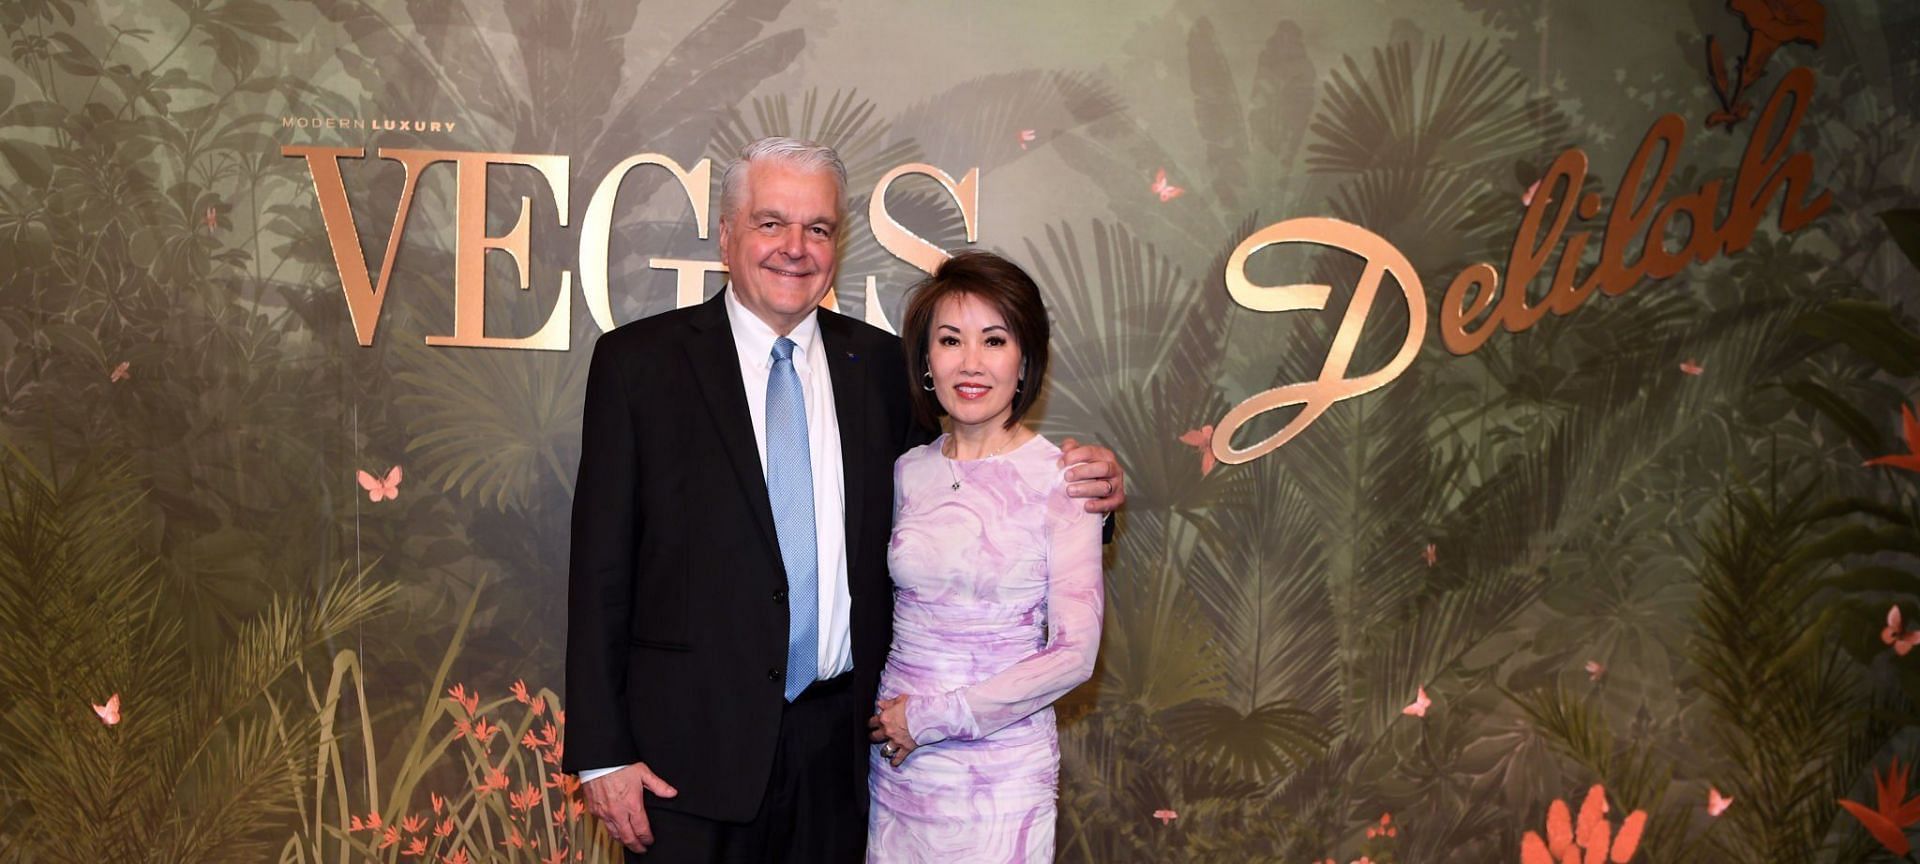 Steve Sisolak and his wife Kathy faced racially offensive remarks and politically inappropriate threats (Image via Denise Truscello/Getty Images)